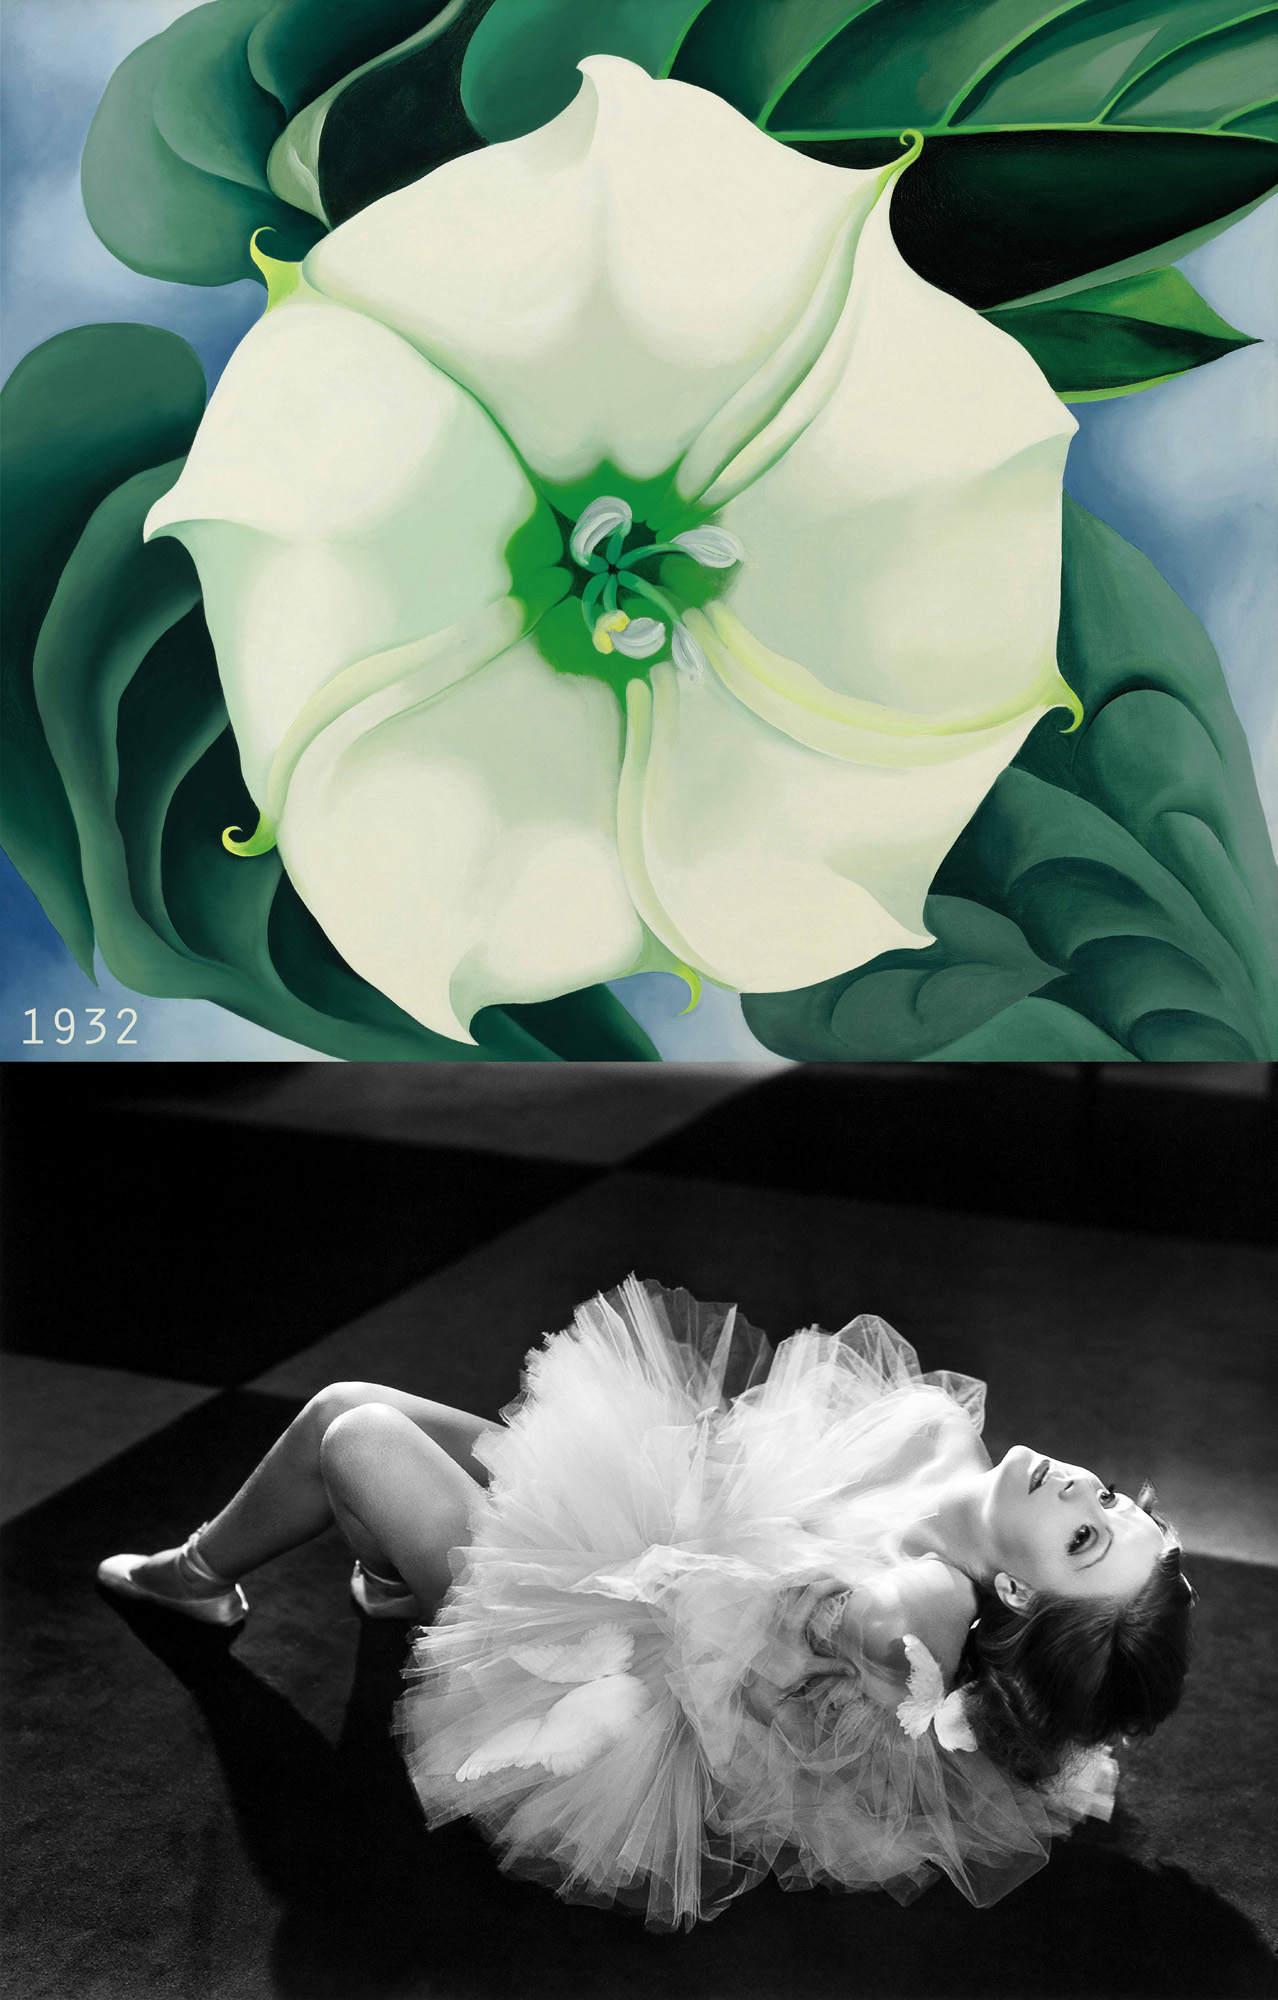 Bonnie Lautenberg pairs "Jimson Weed/White Flower No. 1" by Georgia O’Keeffe with a scene from the film Grand Hotel featuring Greta Garbo (both from 1932).